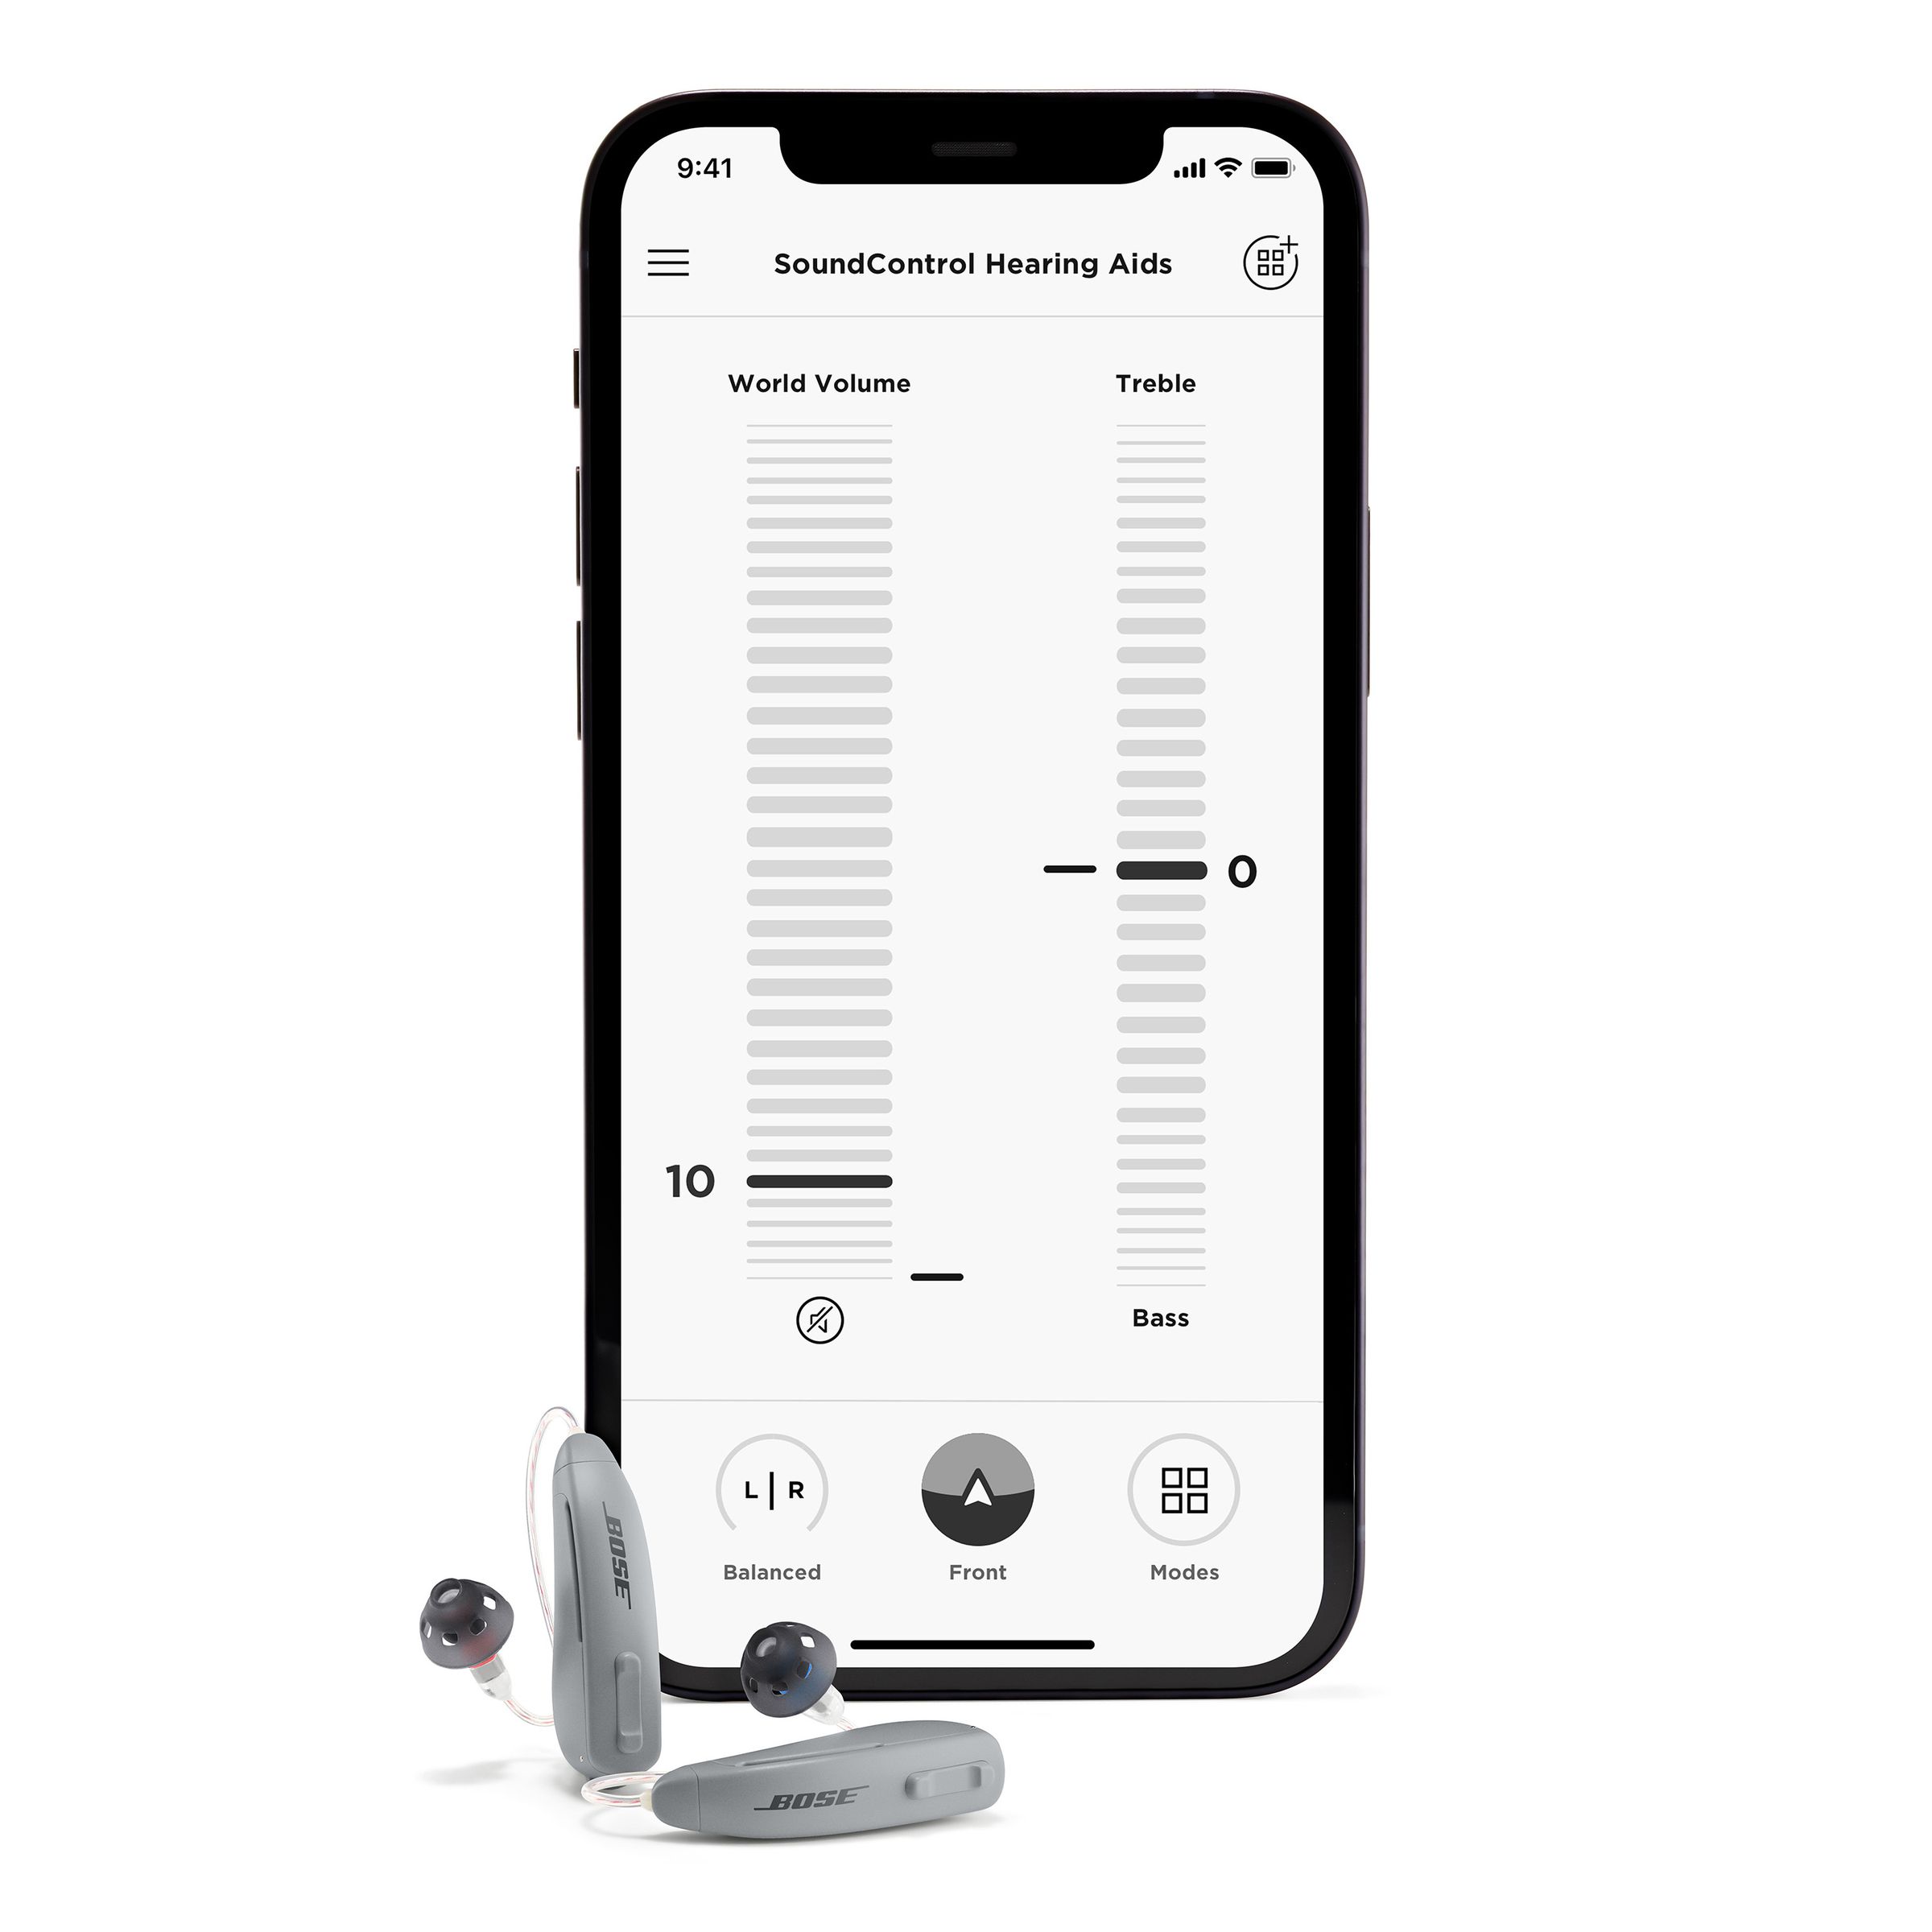 A smartphone propped next to the Bose hearing aids. On the phone’s screen is a page that shows scrolling sliders for adjusting World Volume on the left and Treble and Bass on the right.